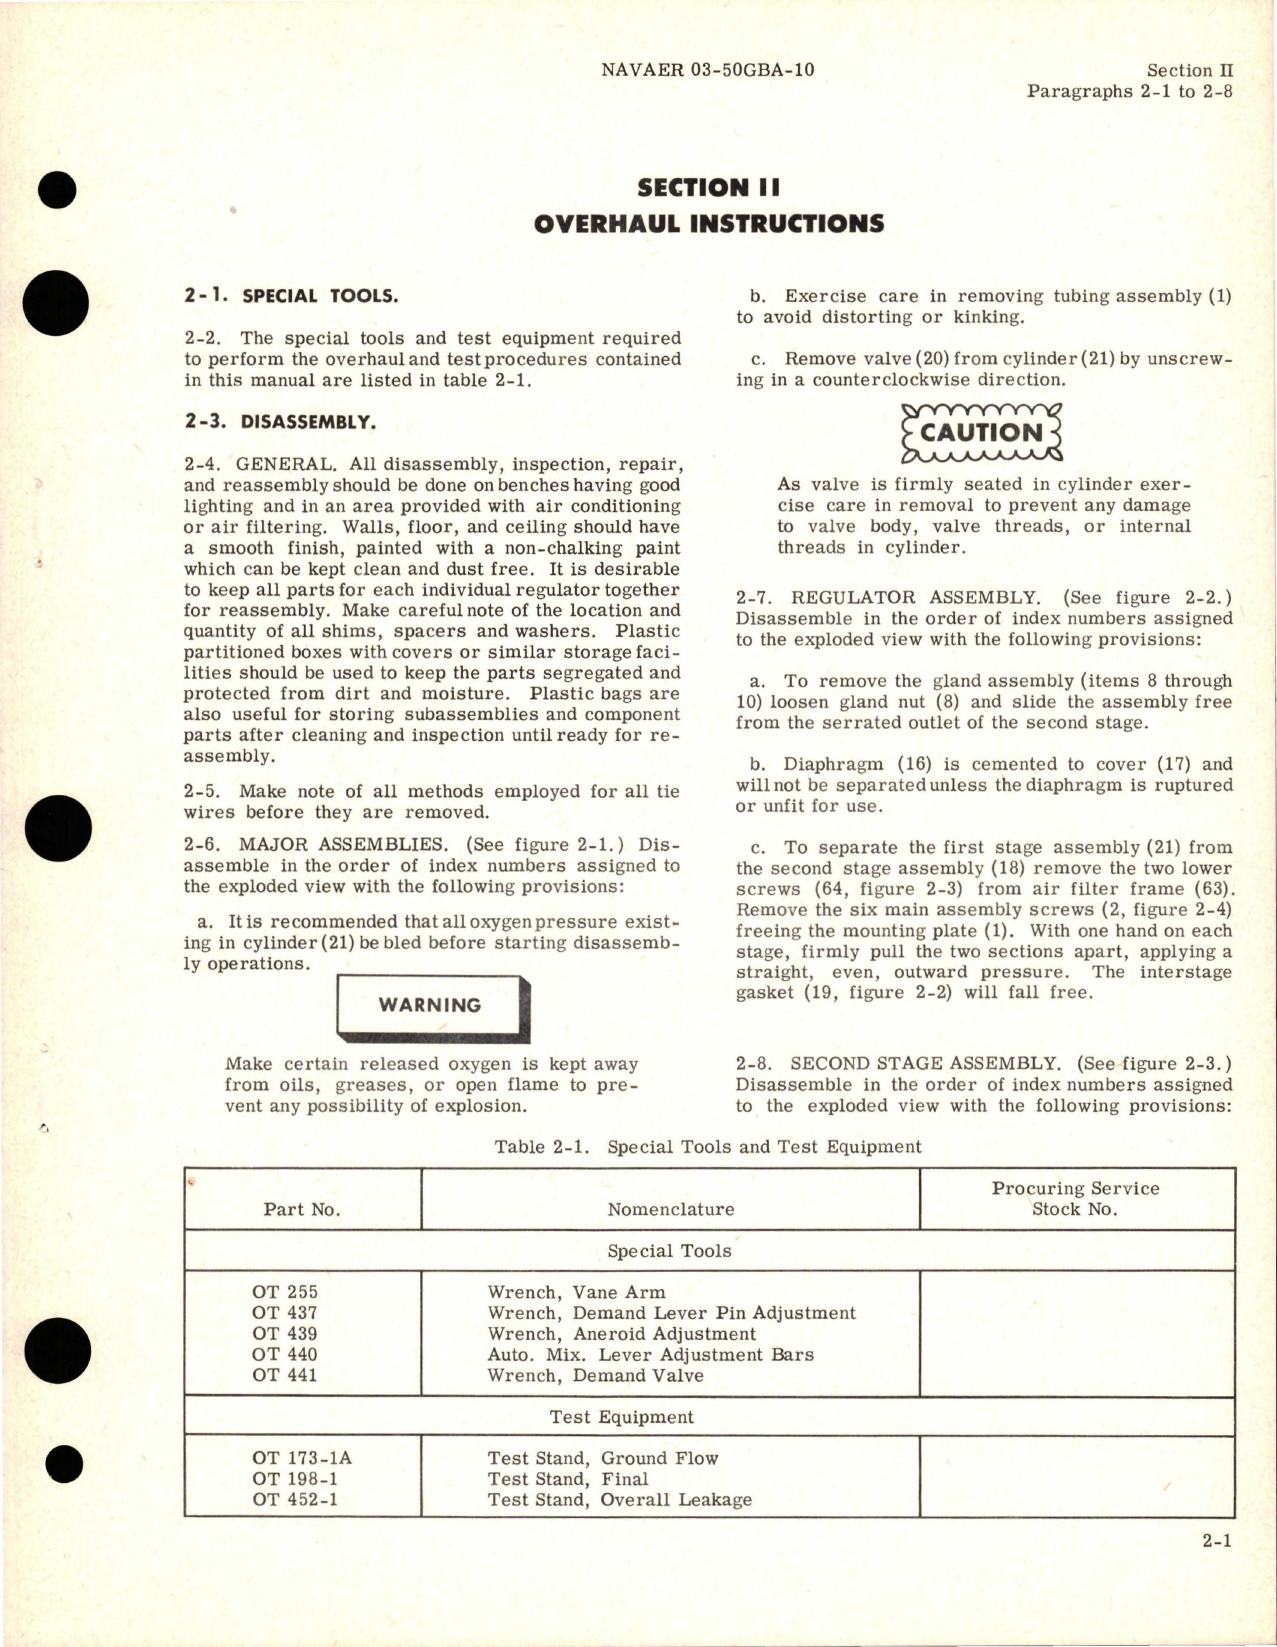 Sample page 7 from AirCorps Library document: Overhaul Instructions for Portable High Pressure Oxygen Unit - Part 15425 